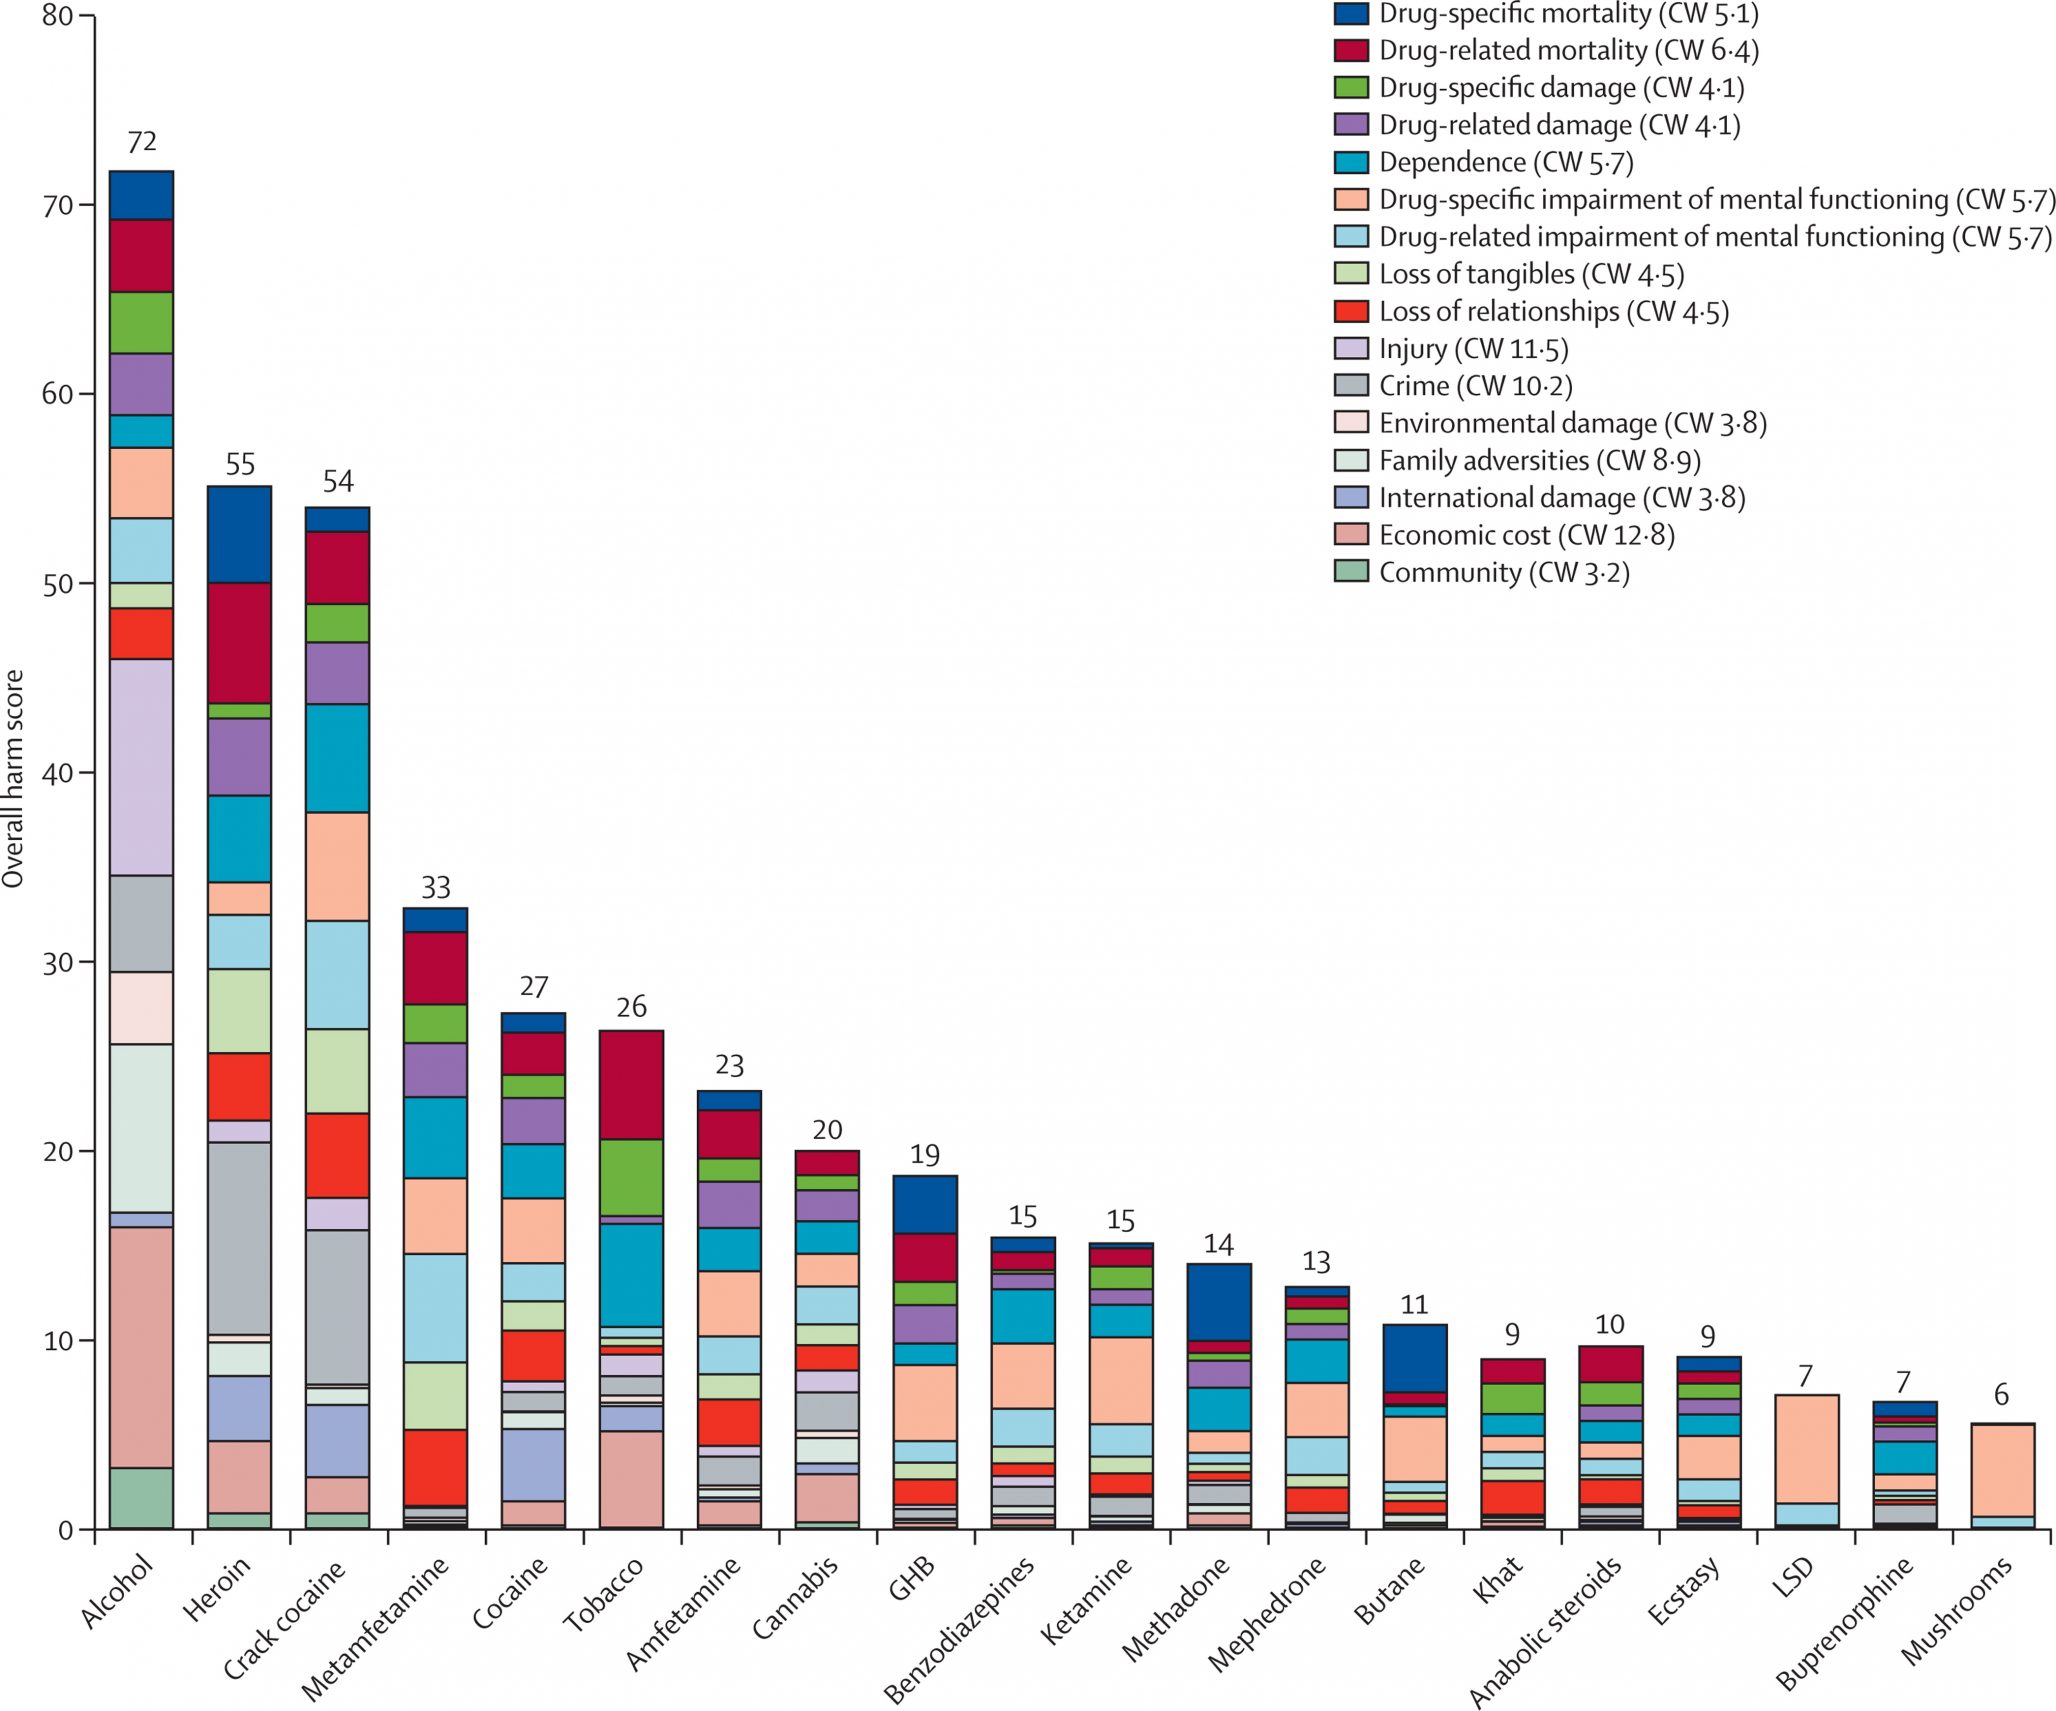 This graph shows the evidence that alcohol is more deadly than other drugs